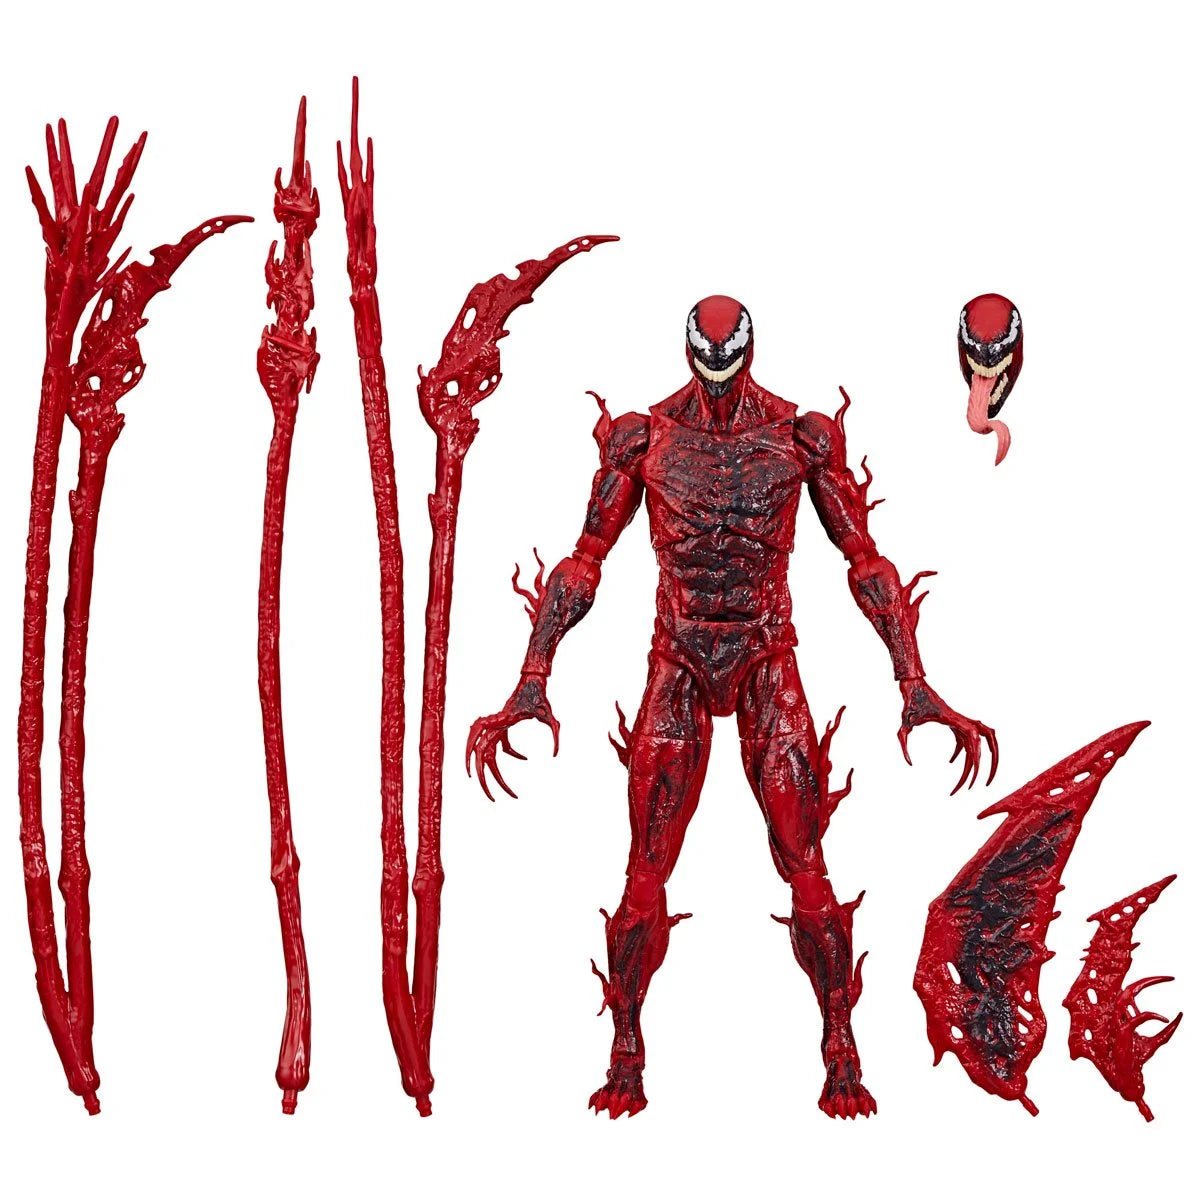 (PREVENTA) Marvel Legends Series Venom: Let There Be Carnage Deluxe 6-Inch Action Figure